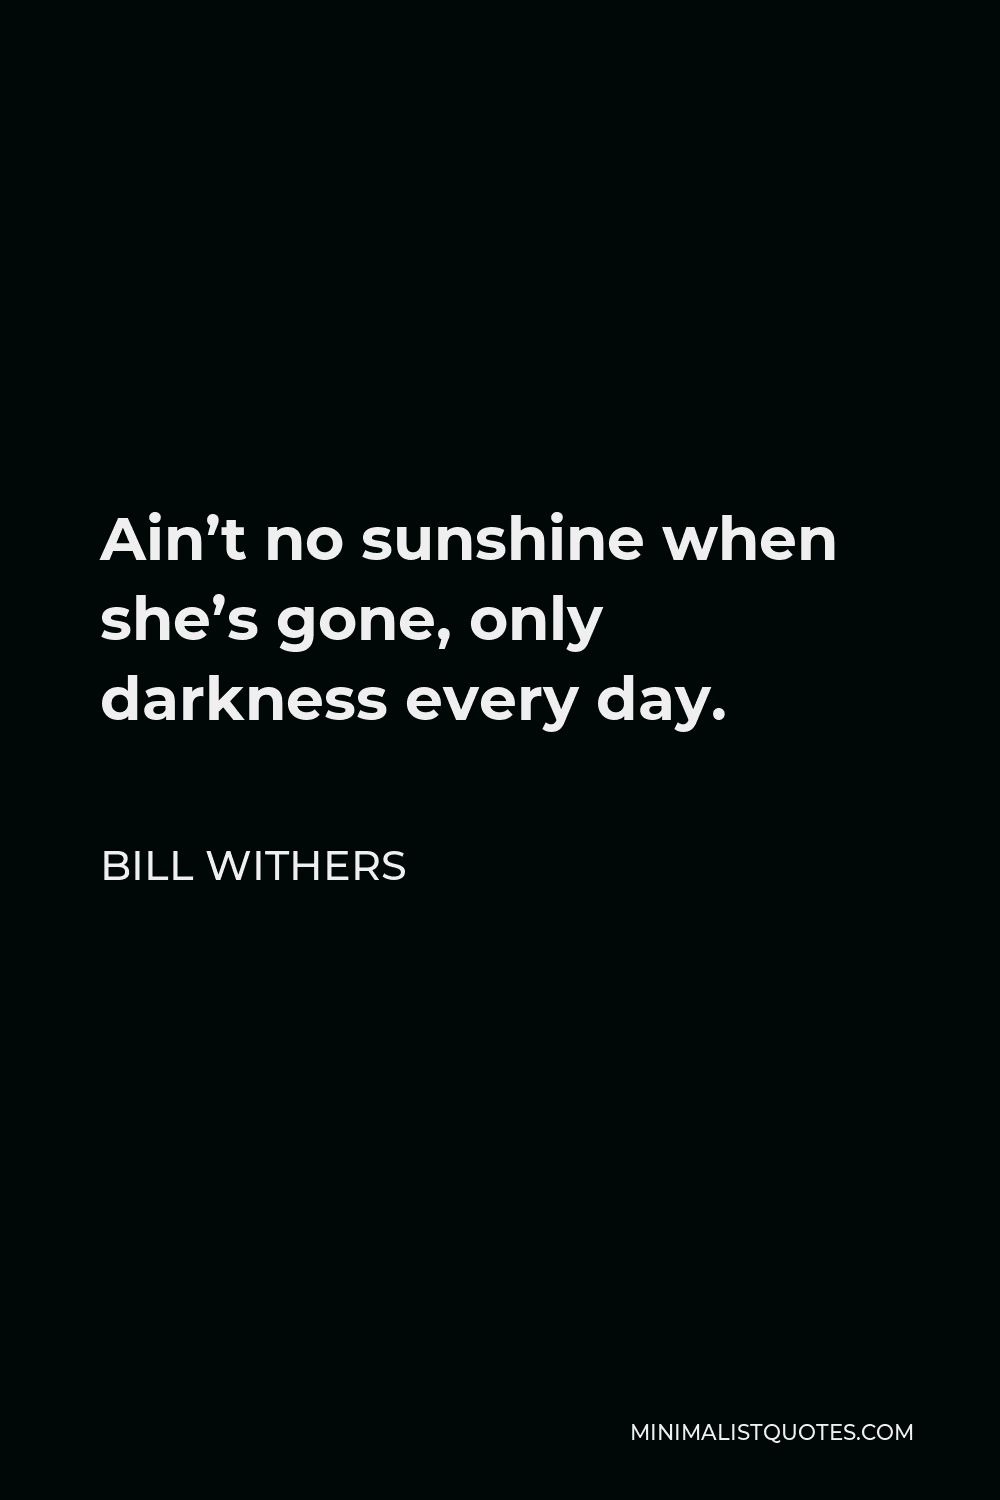 Bill Withers Quote - Ain’t no sunshine when she’s gone, only darkness every day.